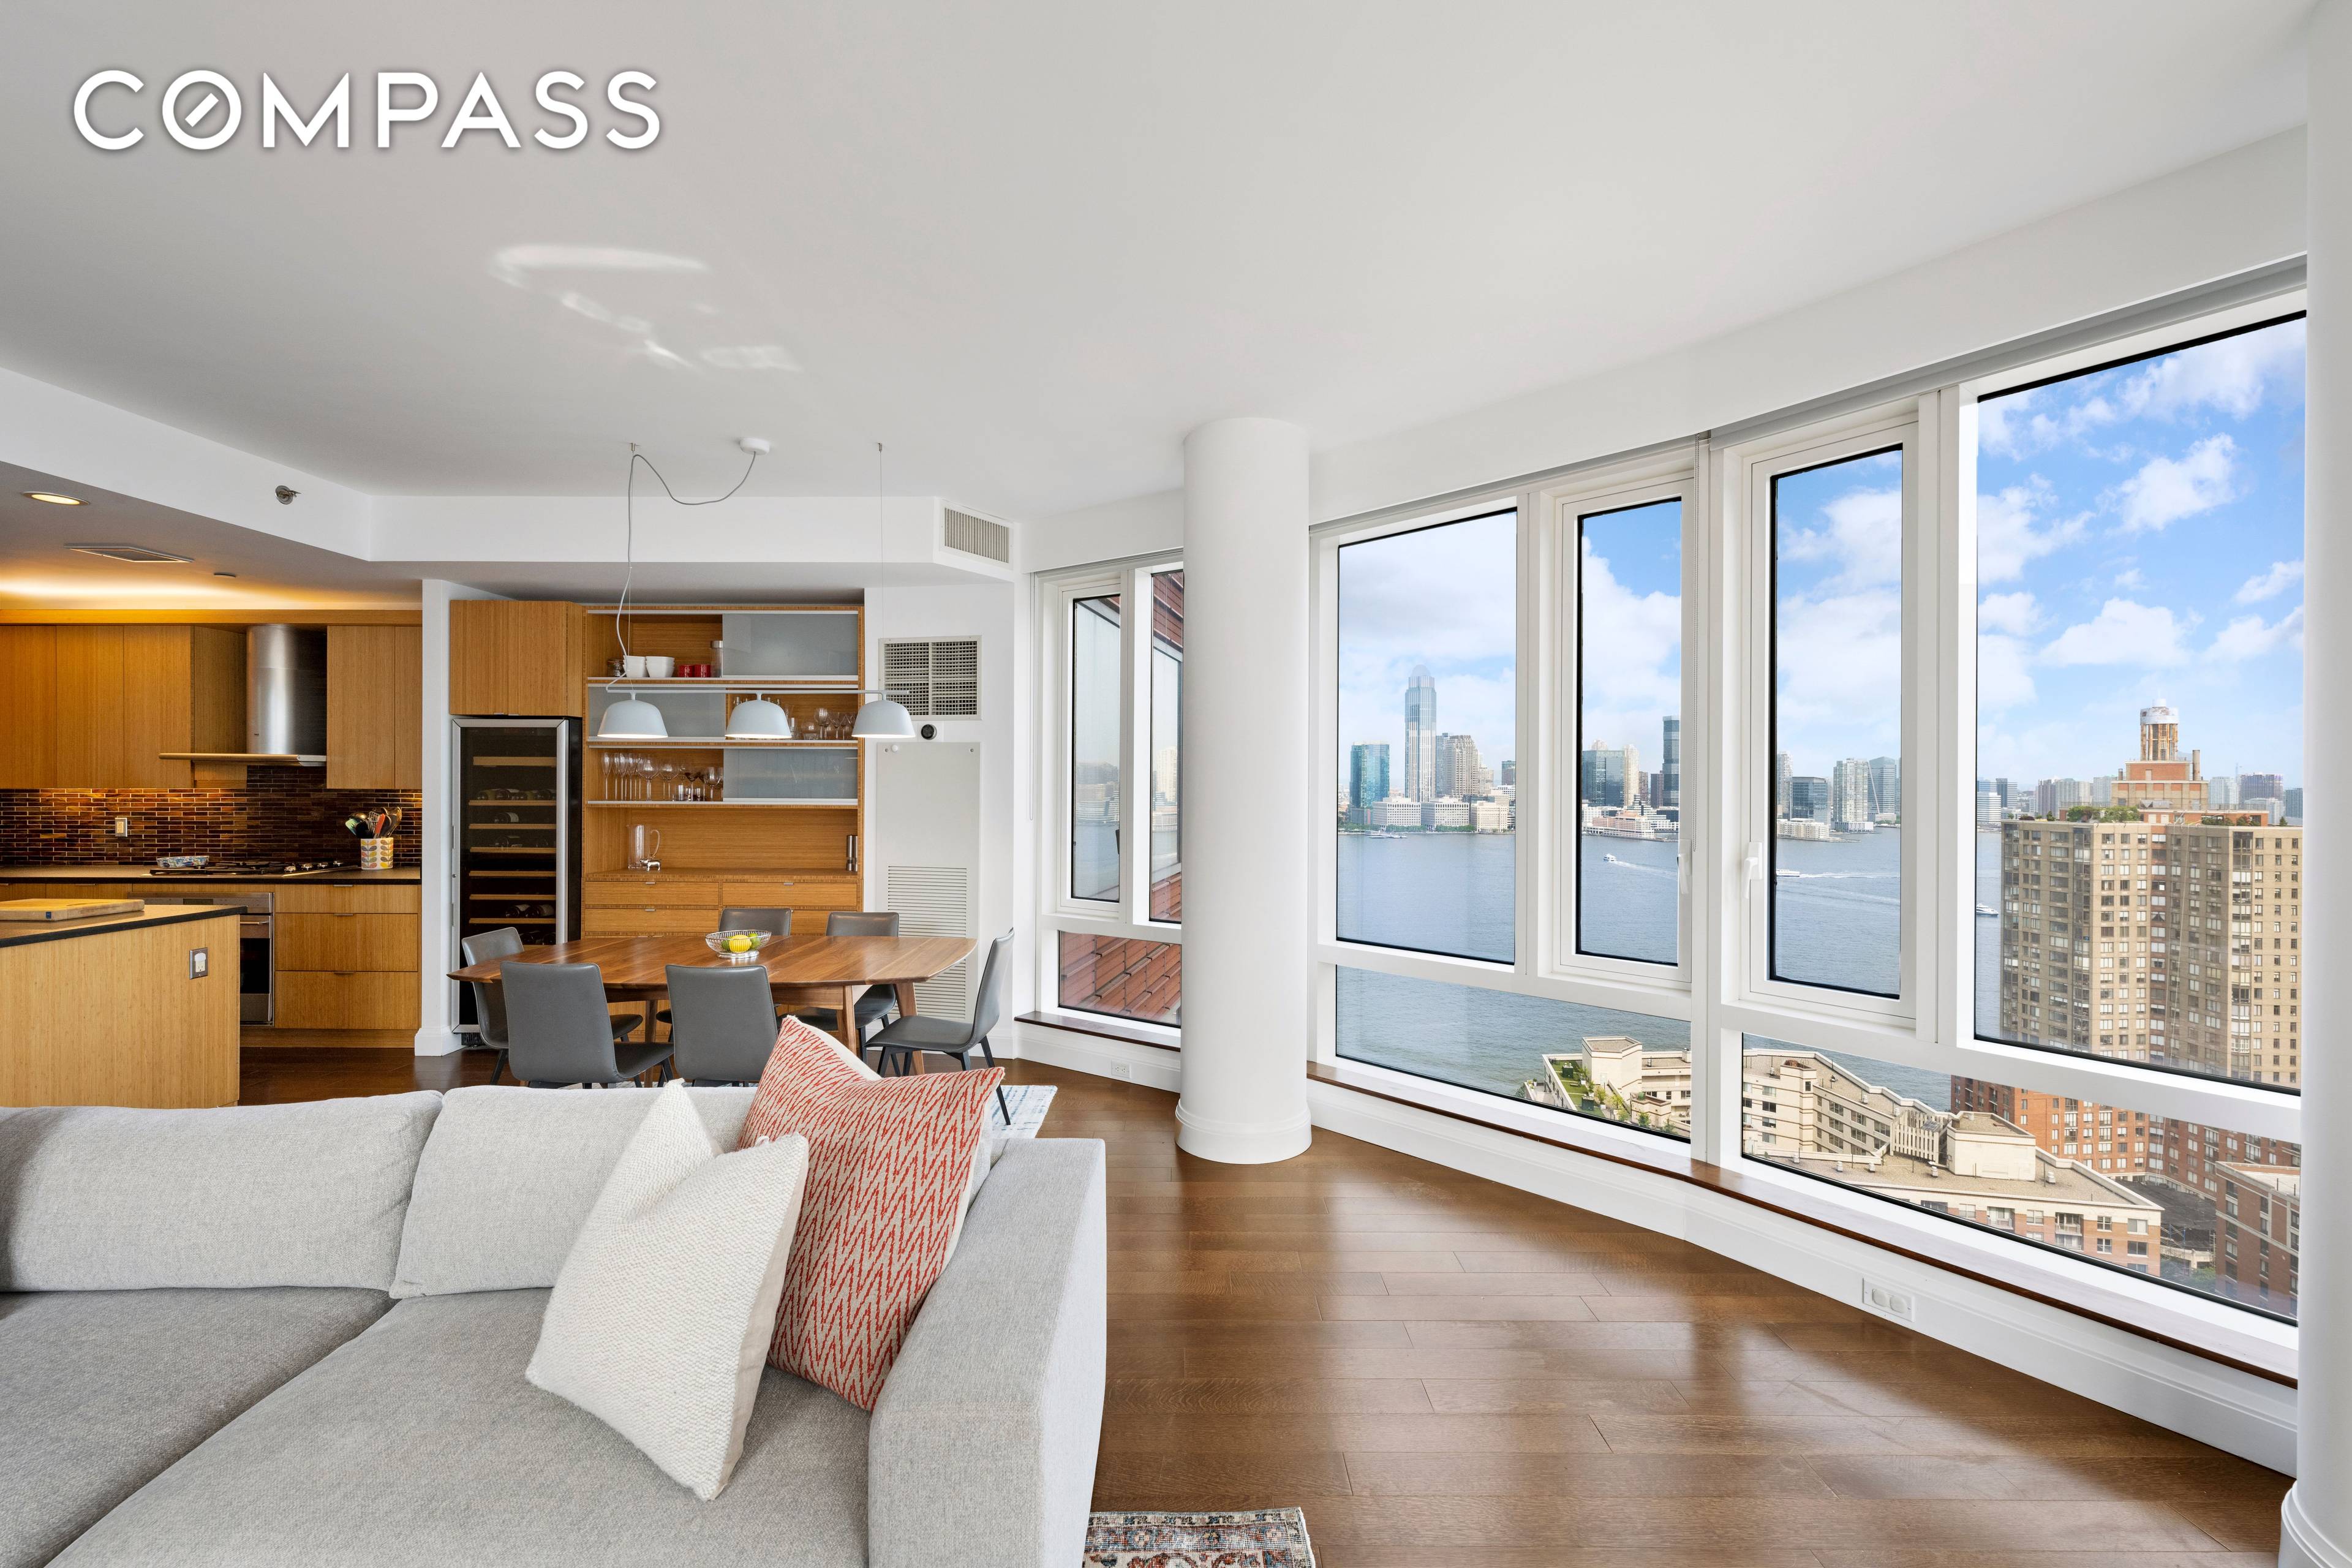 Welcome to 70 Little West St, Unit 26A, a luxurious three bedroom, two bath apartment located in the Visionaire, one of Battery Park City s most desirable buildings.